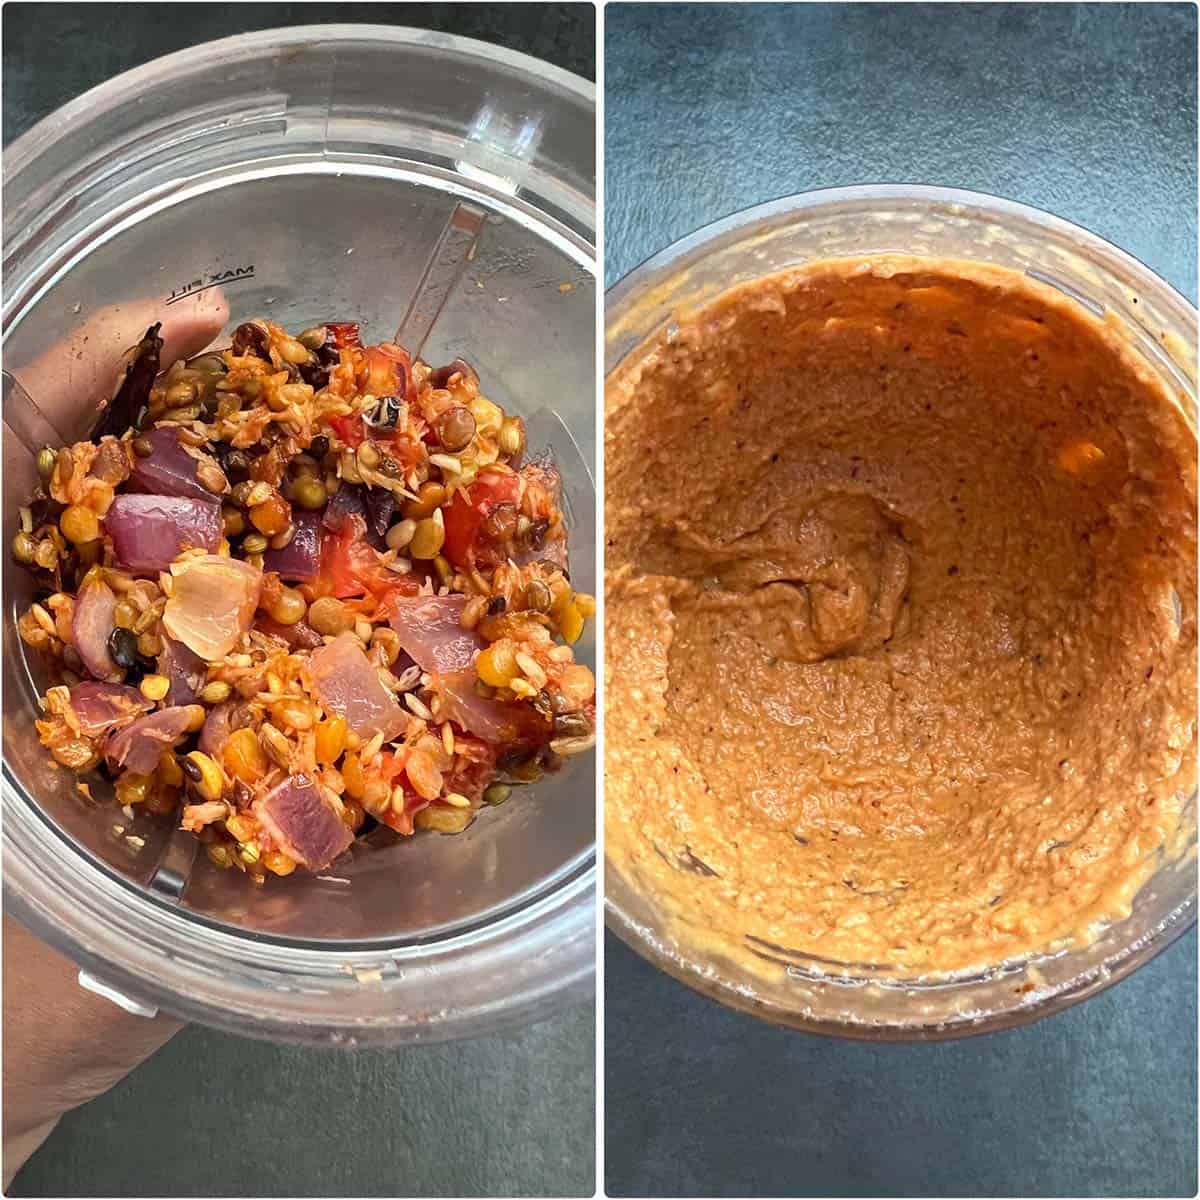 2 panel photo showing the blender jar before and after grinding the spice paste.